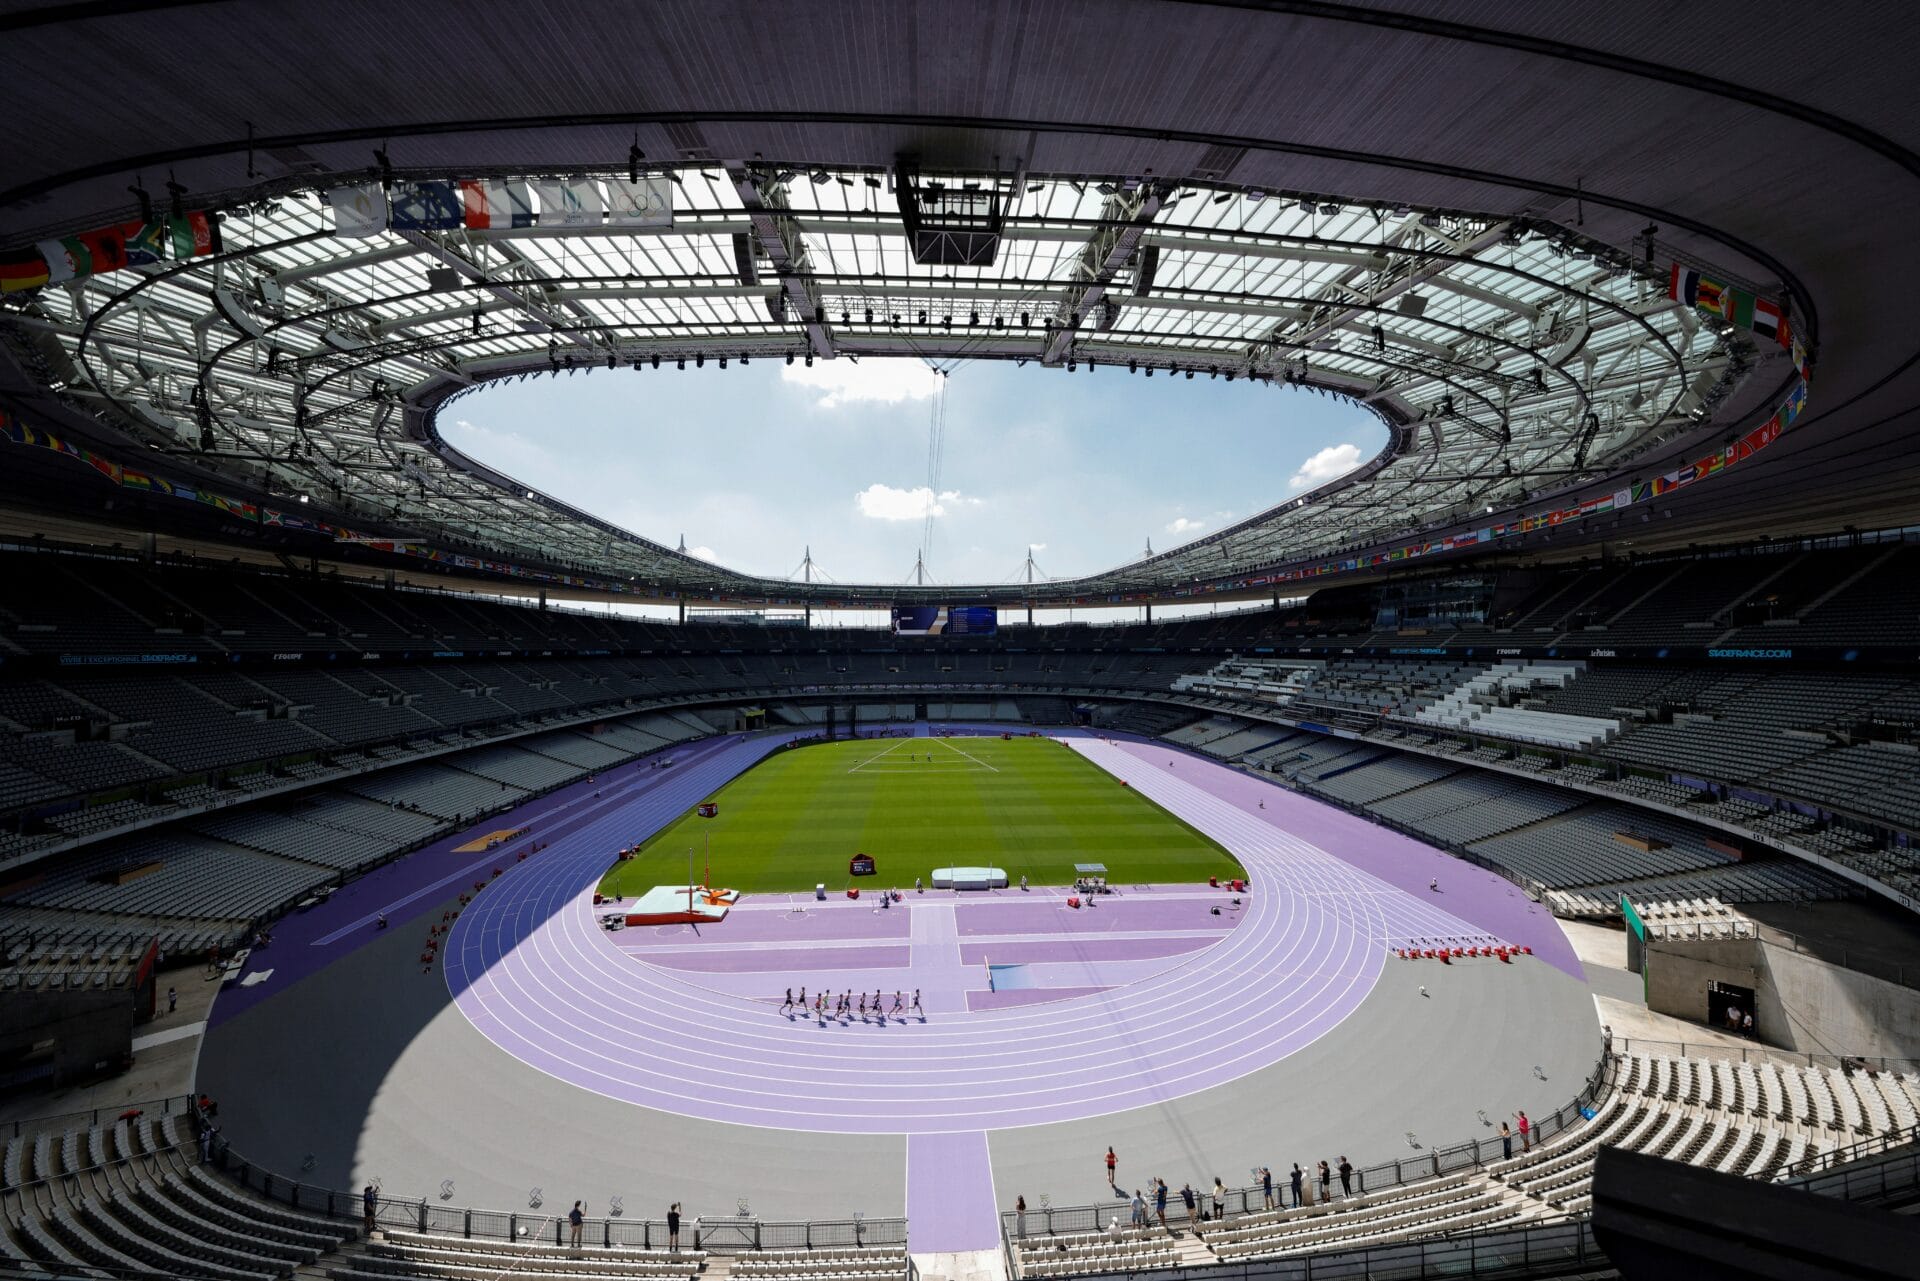 Regional athletes compete during a test event for the Olympics Games at the Stade de France, in Saint-Denis on June 25, 2024. The Stade de France will host track and field events and Rugby sevens game during the Paris 2024 Olympic Games. (Photo by GEOFFROY VAN DER HASSELT/AFP via Getty Images)